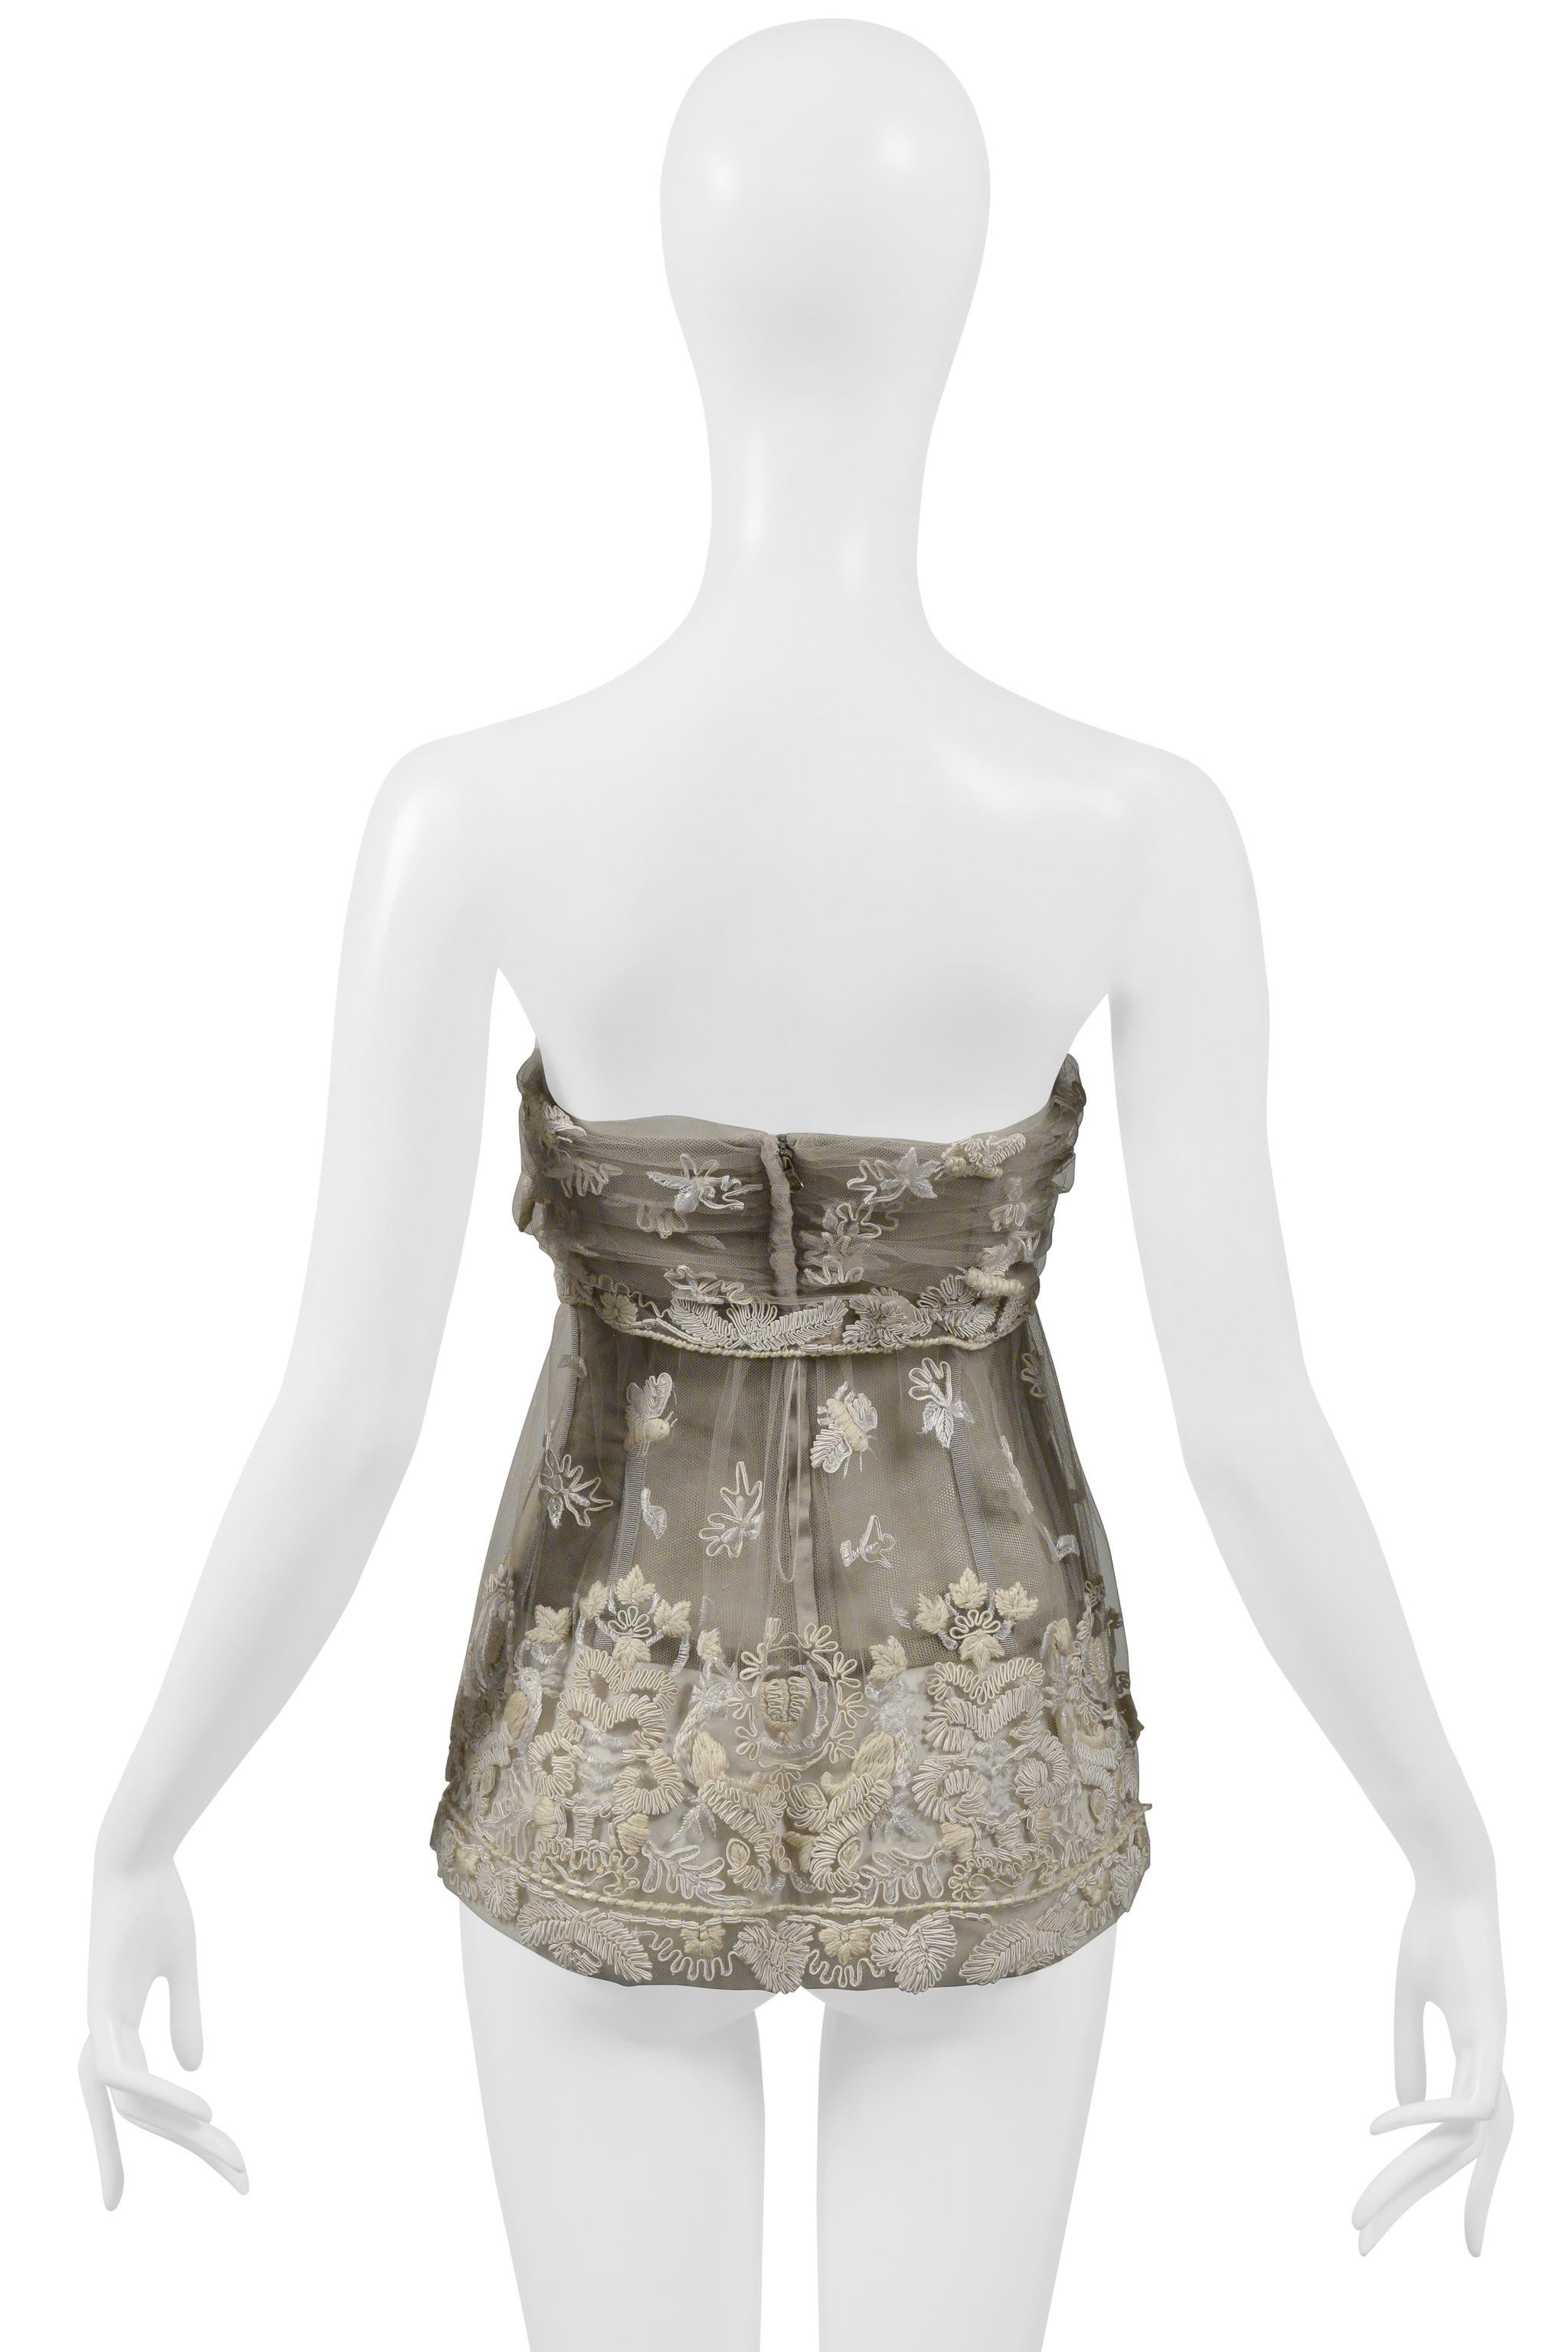 Dolce & Gabbana Off-White Lace Bustier With Embroidery Side 2006 In Excellent Condition For Sale In Los Angeles, CA